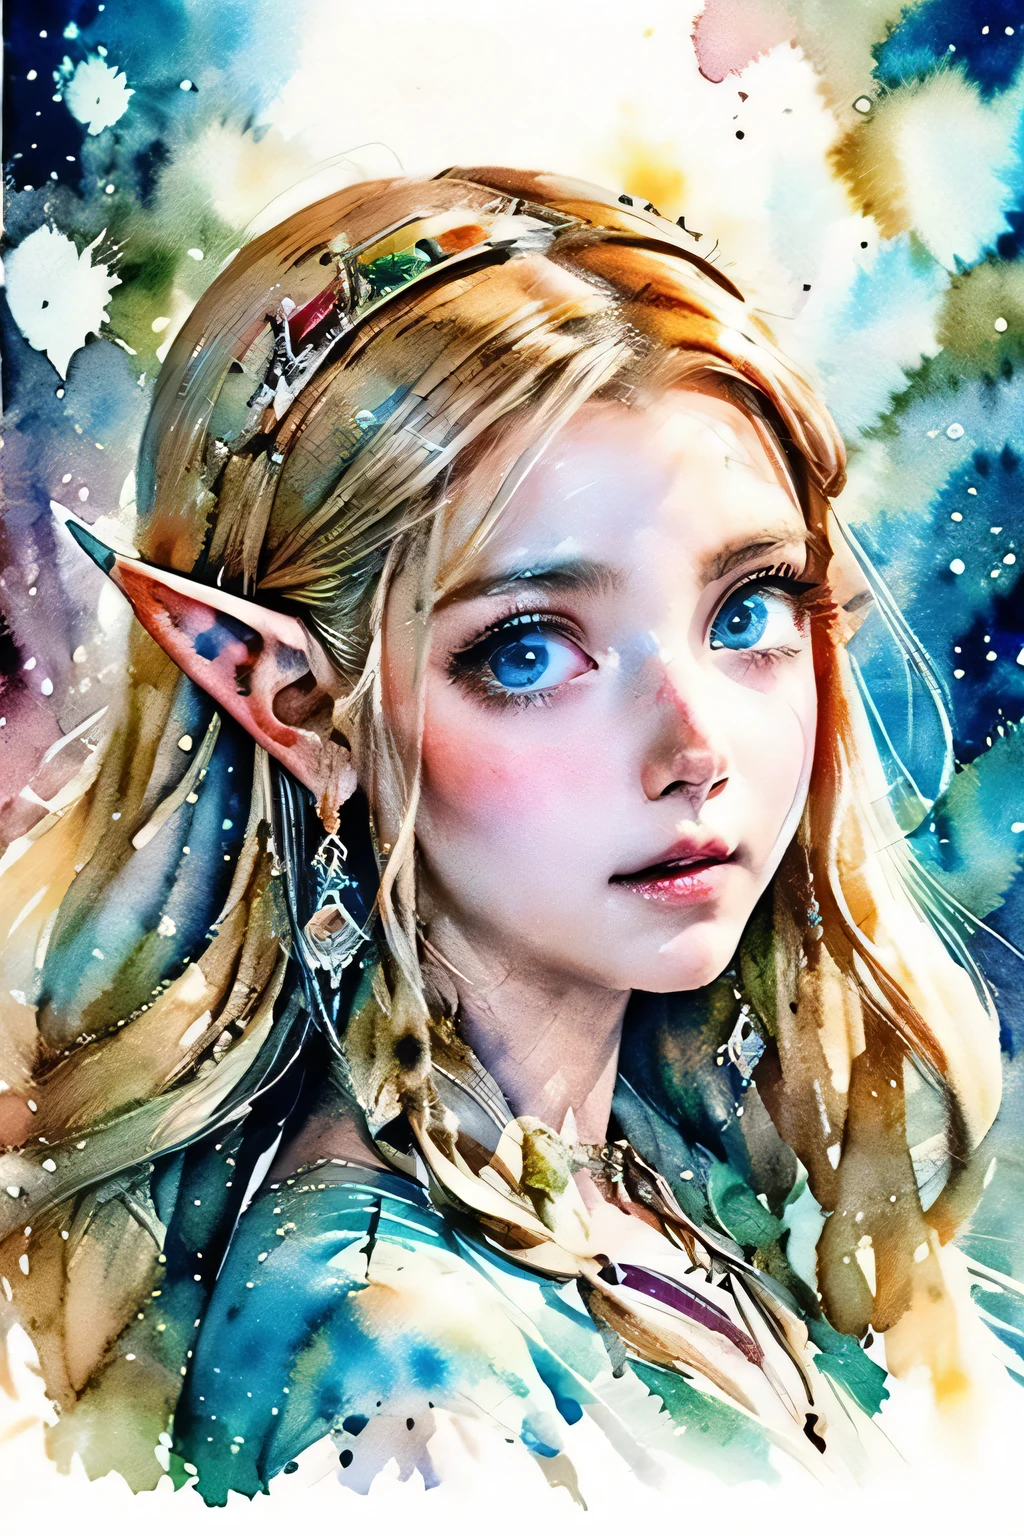 zelda style art, elf princess knight, Intense watercolor painting, detailed watercolor art, watercolor splash, surreal, beautiful and expressive painting, beautiful artwork illustration, vibrant colors sharp illustration, a drawing of a woman with long hair holding a sword, botw style, zelda botw, elf princess, elf girl, alluring elf princess knight, by Ryan Yee, from legend of zelda, anime fantasy illustration, highly detailed exquisite fanart, beautiful celestial mage, princess zelda, from bravely default ii, 